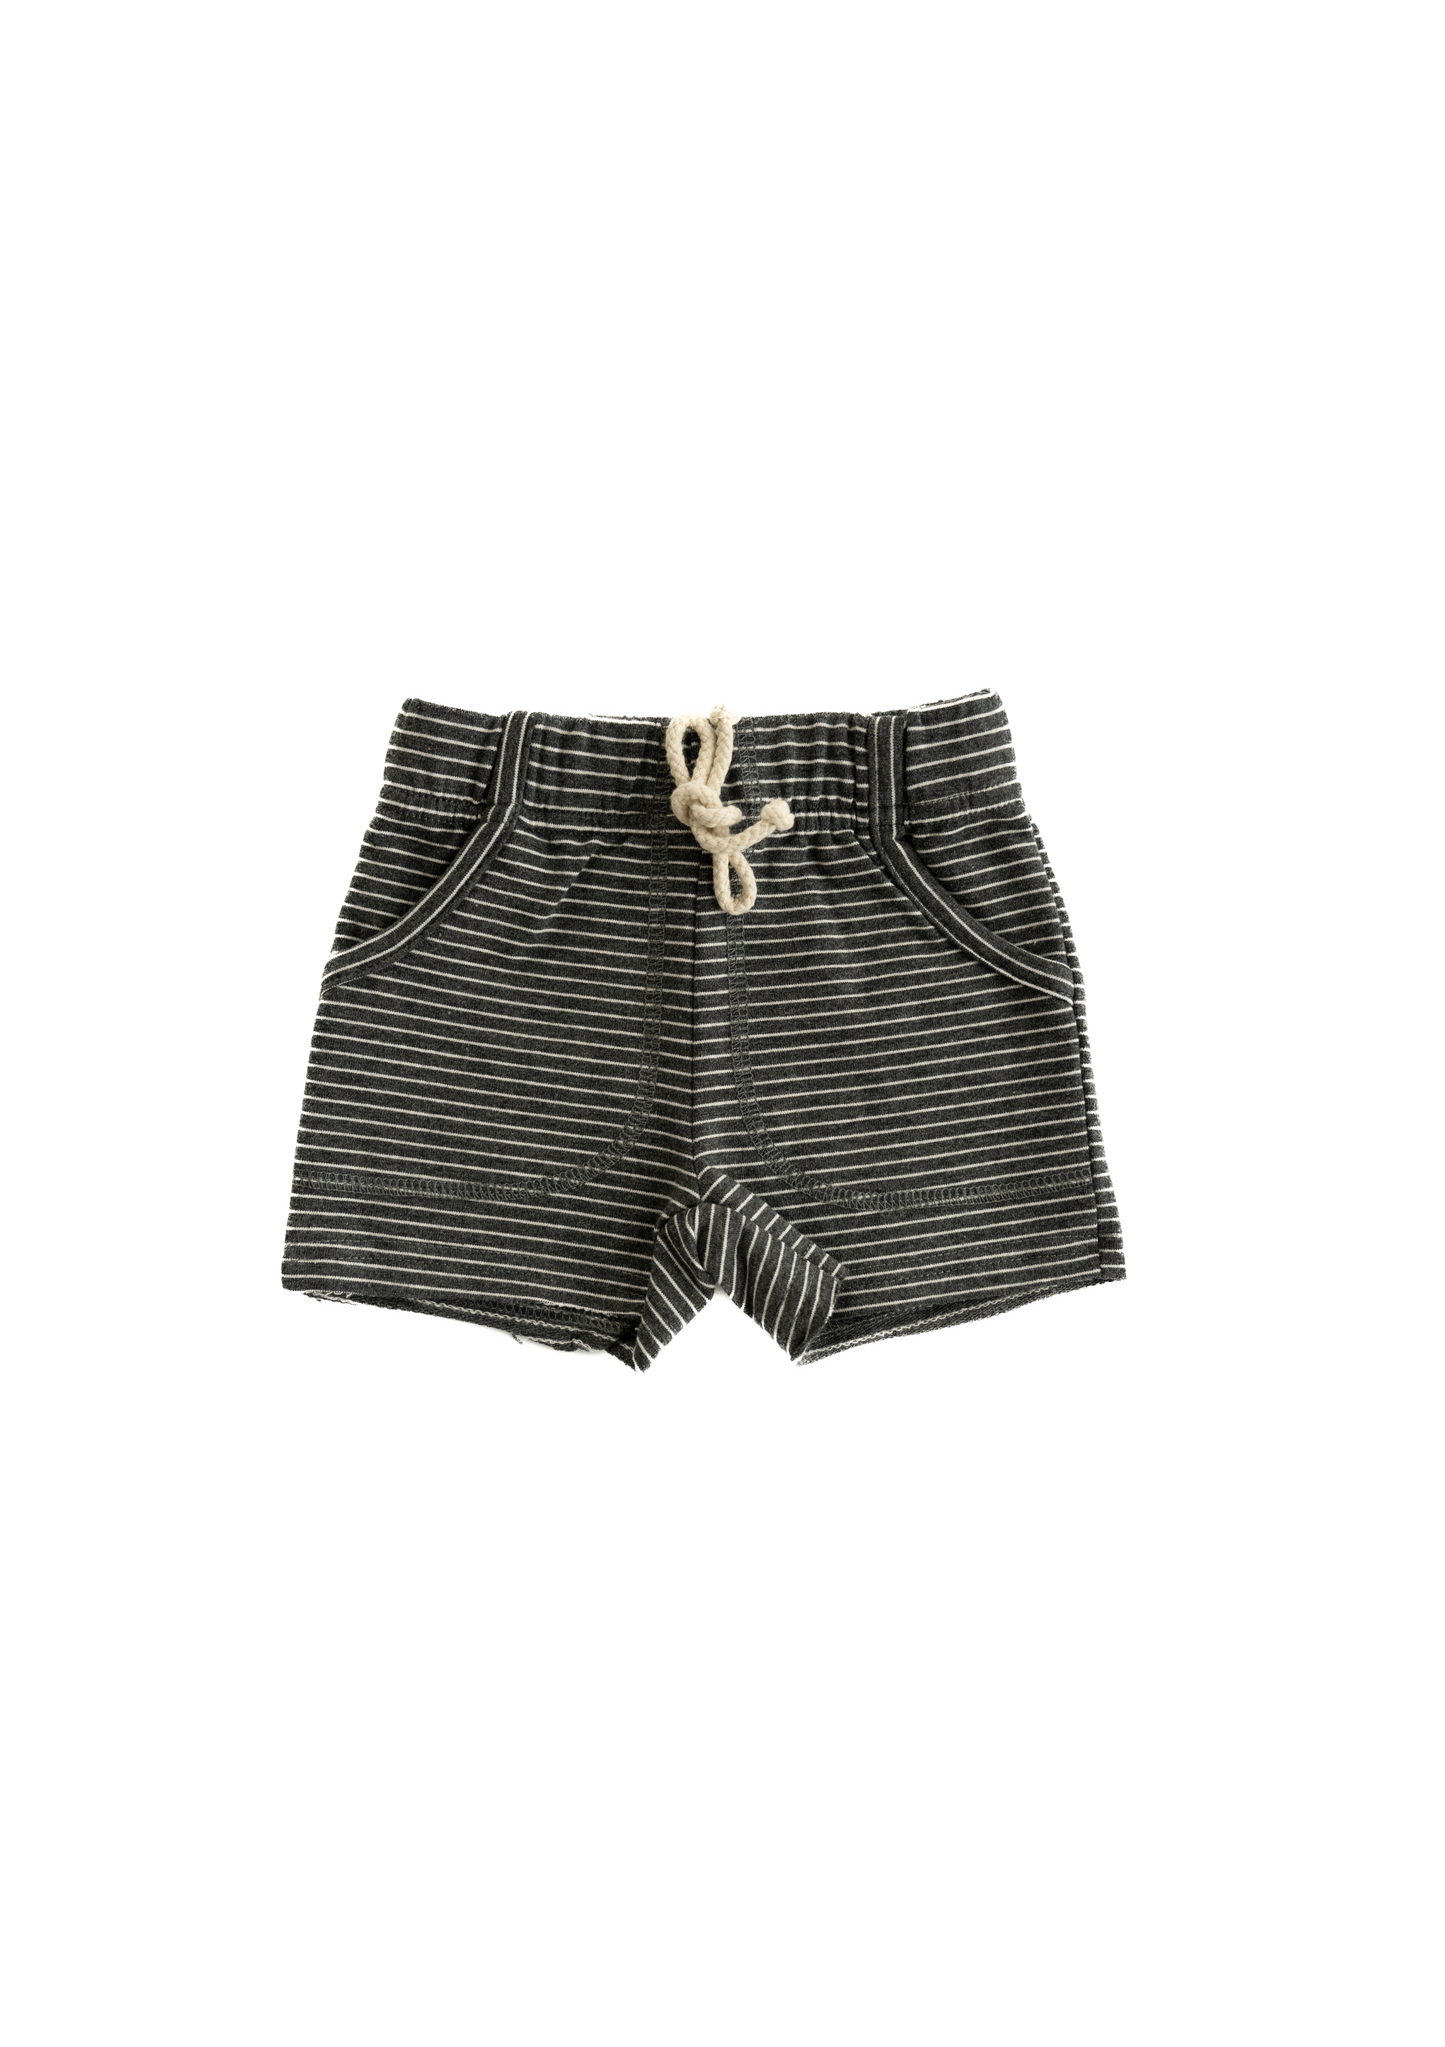 SK8 SHORTS IN CHARCOAL